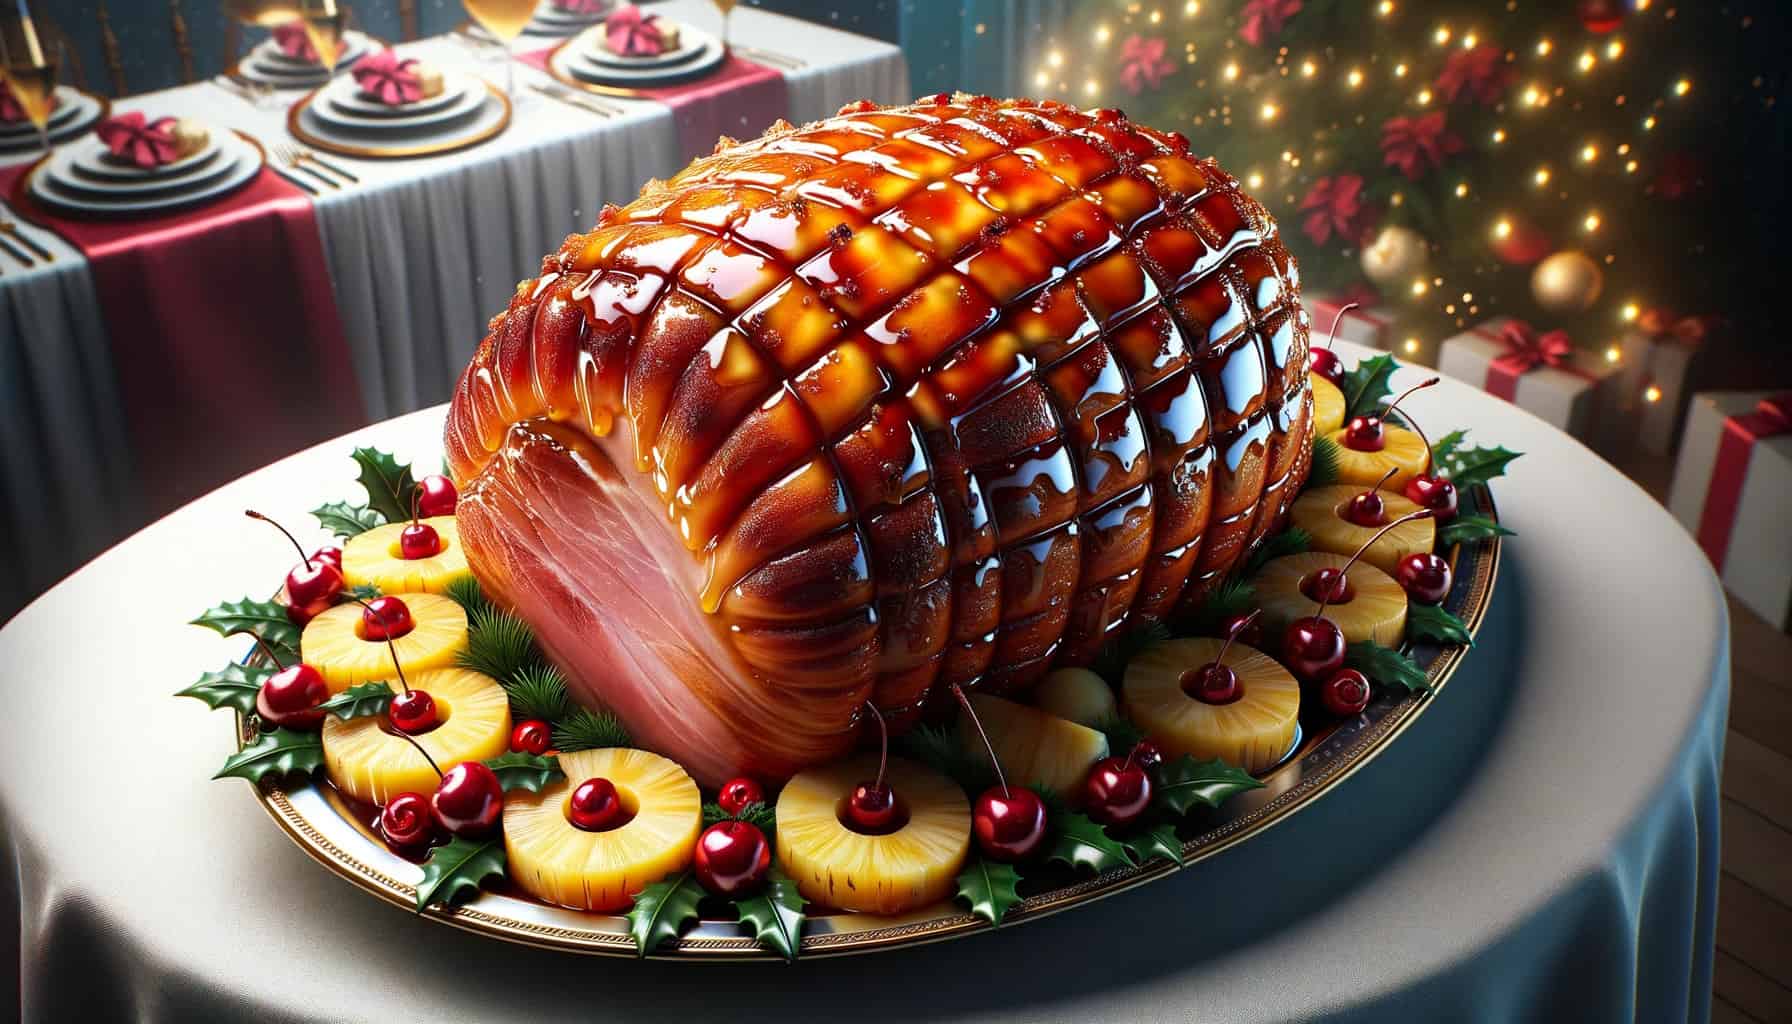 Tender de natal (christmas ham) is on a large serving platter. The ham is glazed with a golden-brown honey coating adorned with pineapple slices and cherries.